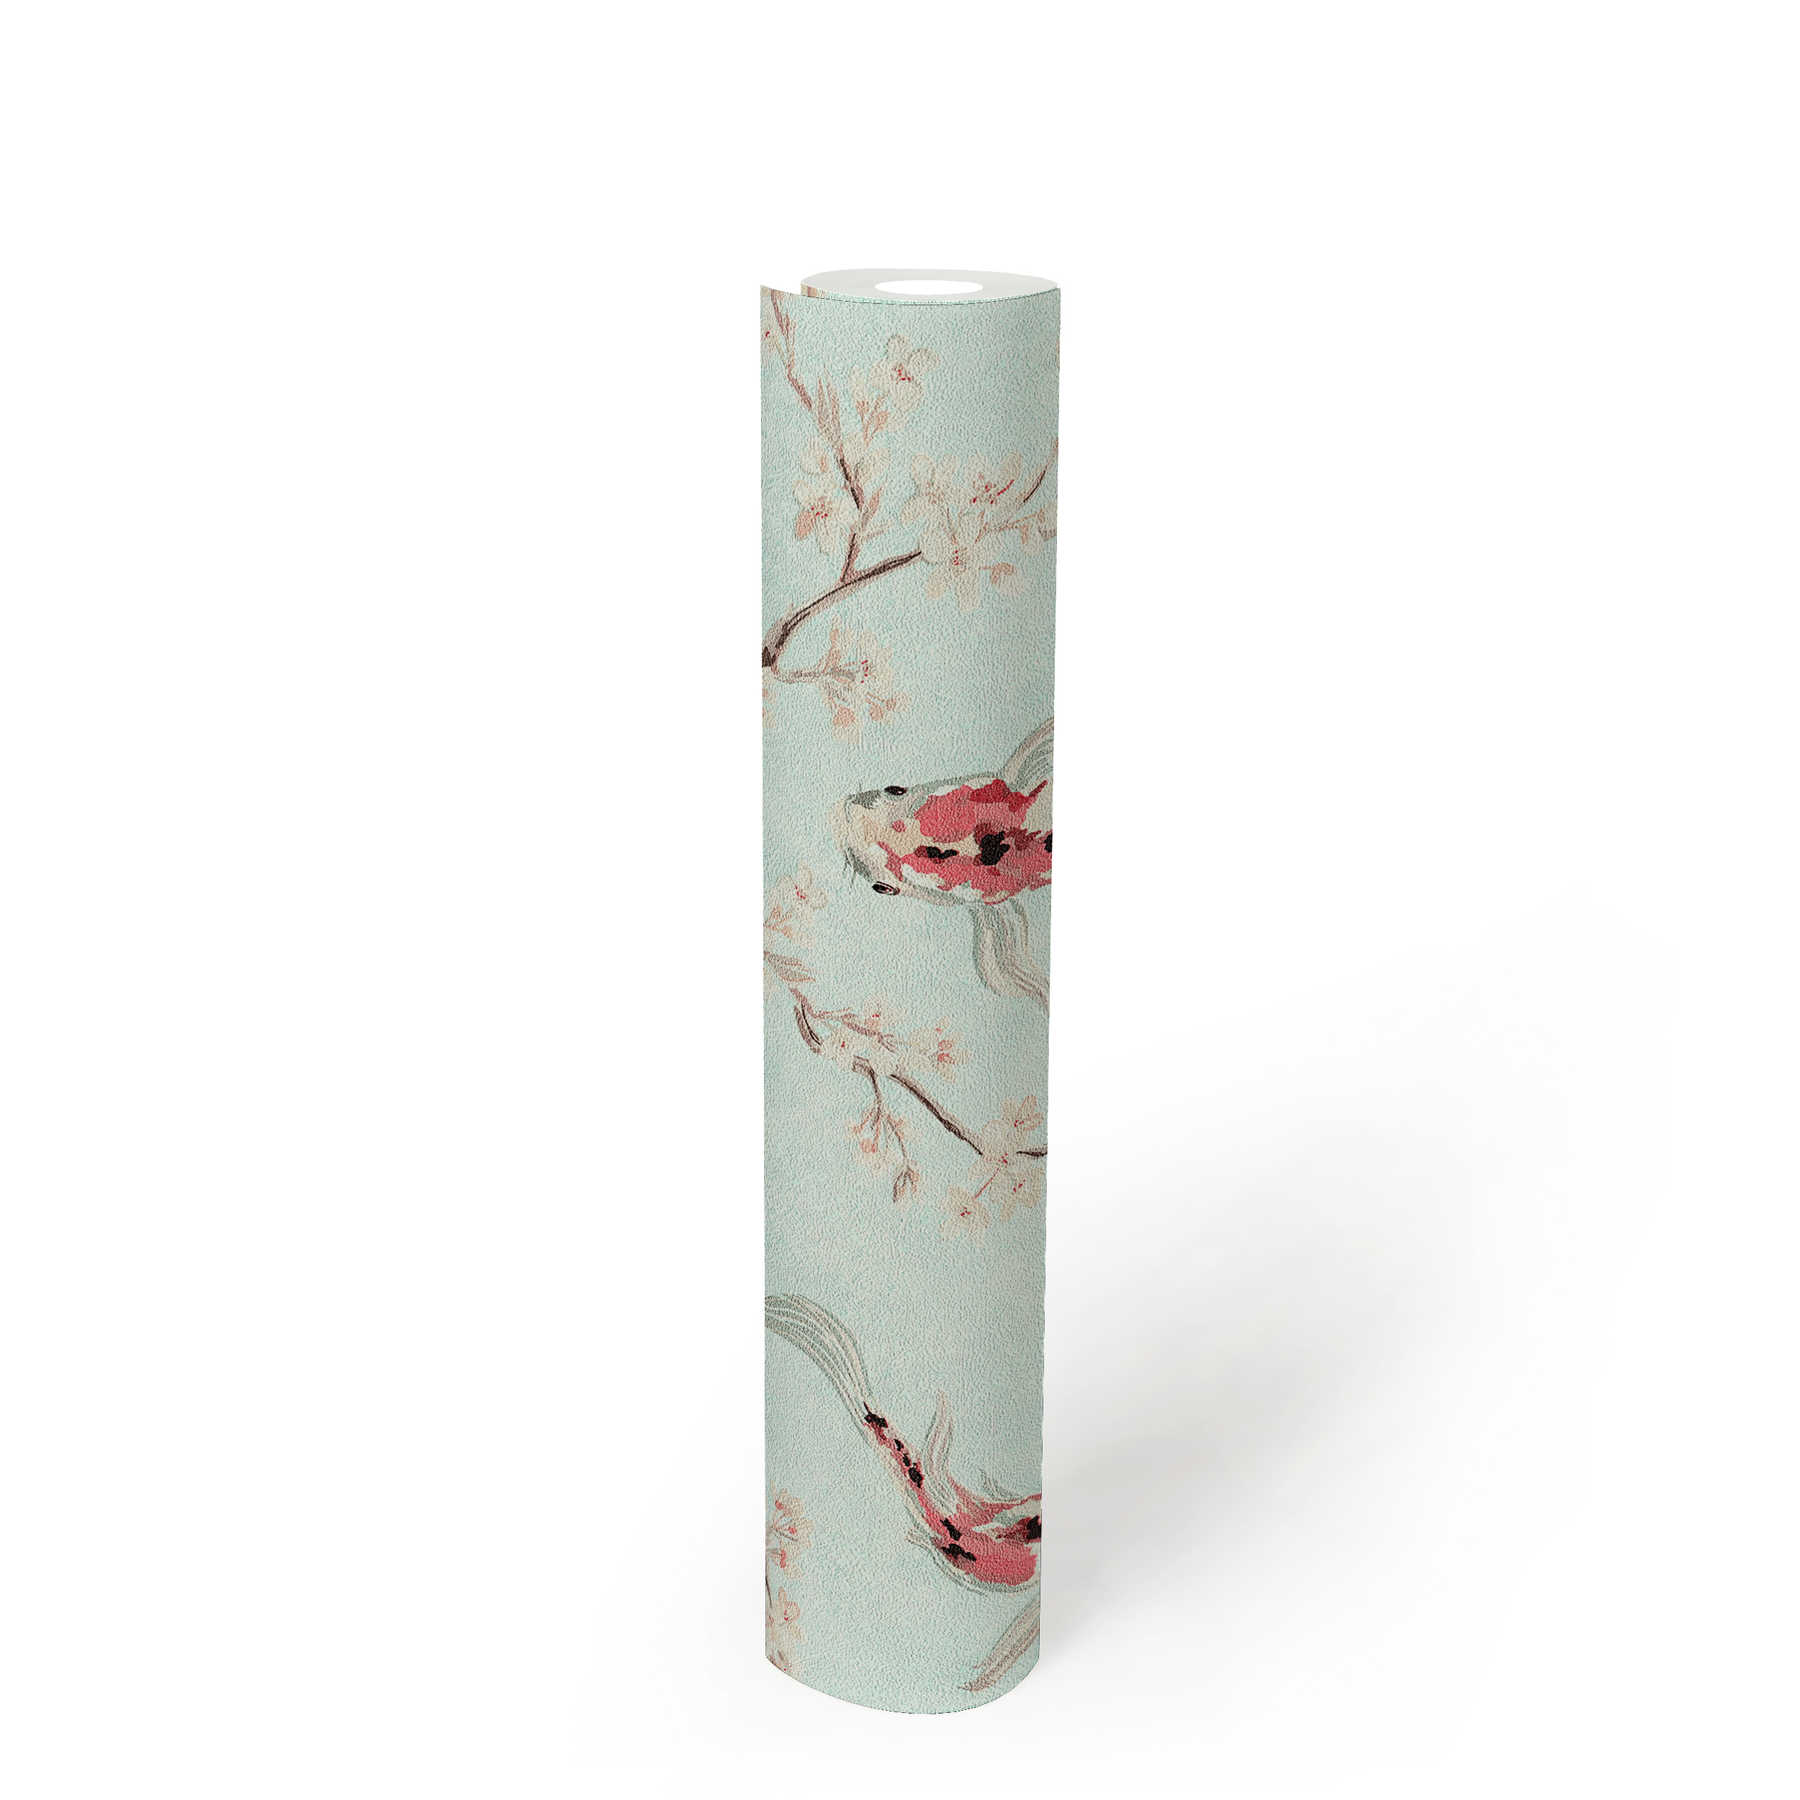             Non-woven wallpaper with koi pattern in Asian style - blue, red, beige
        